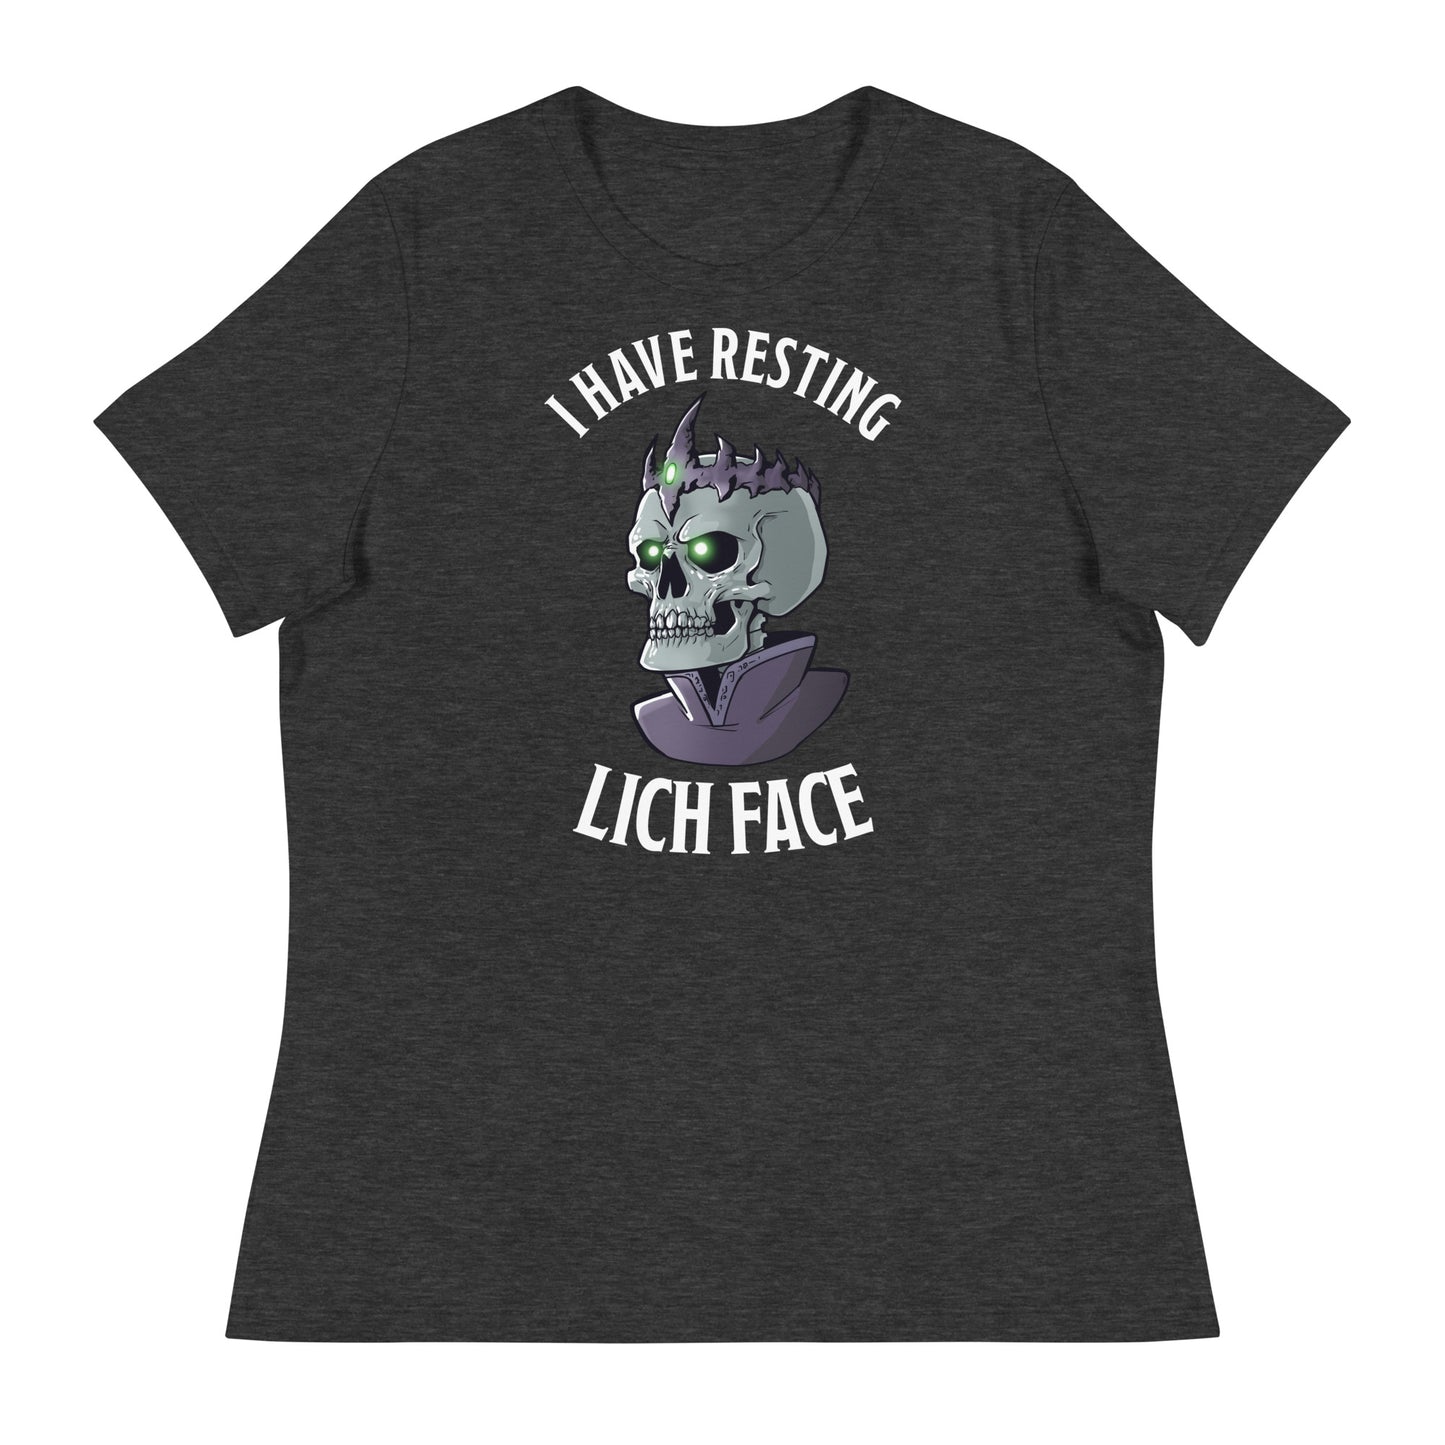 Resting Lich Face Women's Relaxed T-Shirt  Level 1 Gamers Dark Grey Heather S 